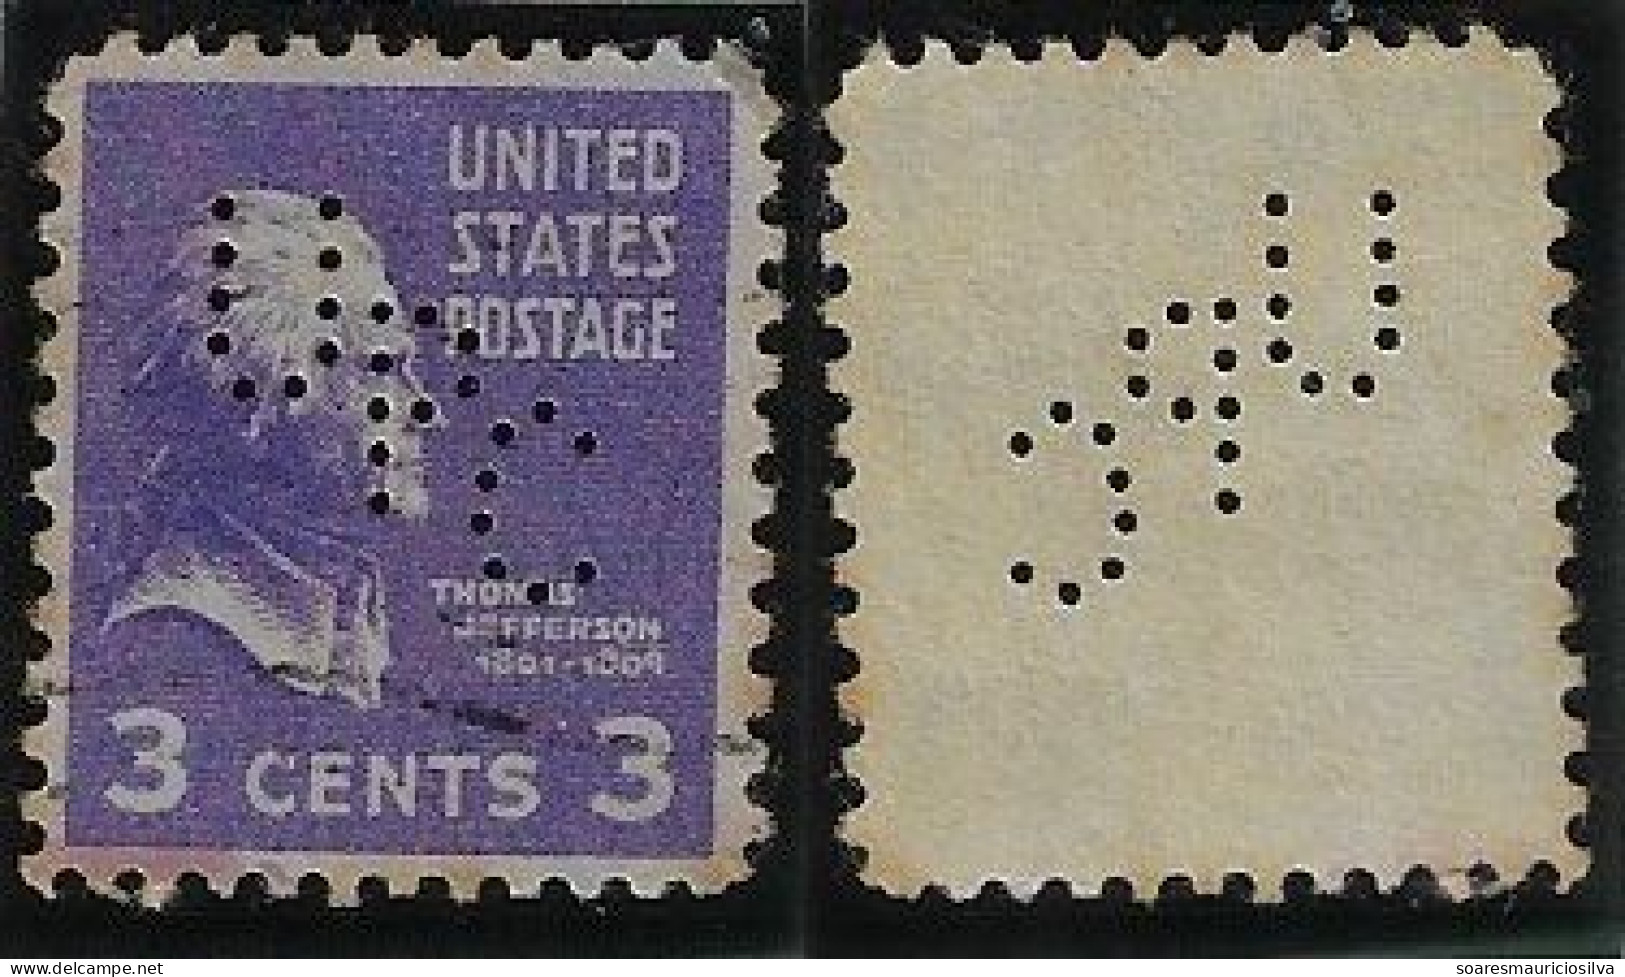 USA United States 1931/1954 Stamp With Perfin UPC By The Union Pacific Coal Company From Rock Springs Lochung Perfore - Perforados